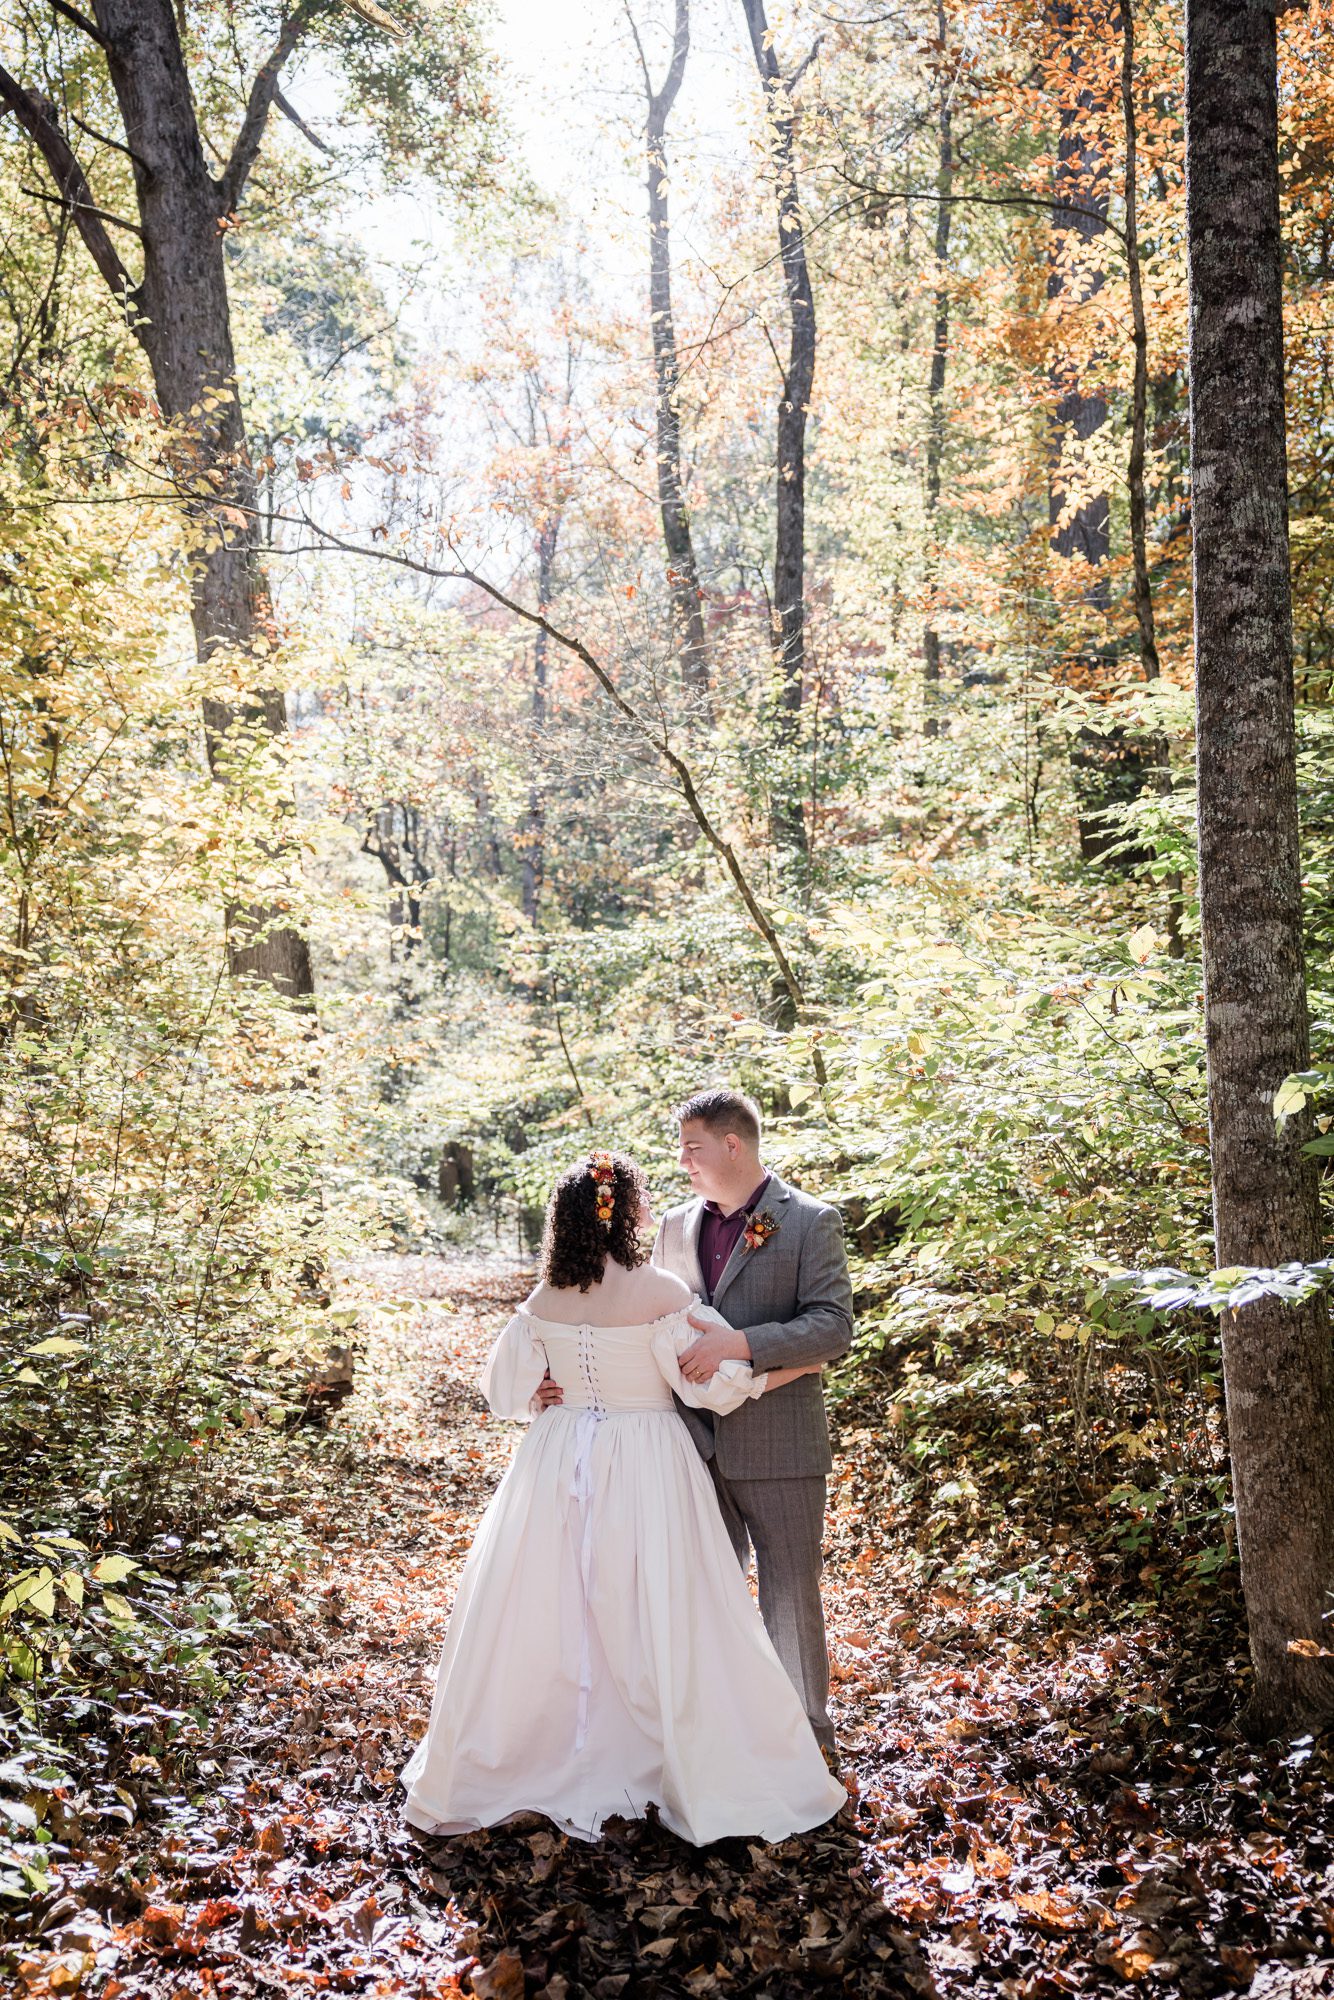 Glowing forest bride and groom portrait